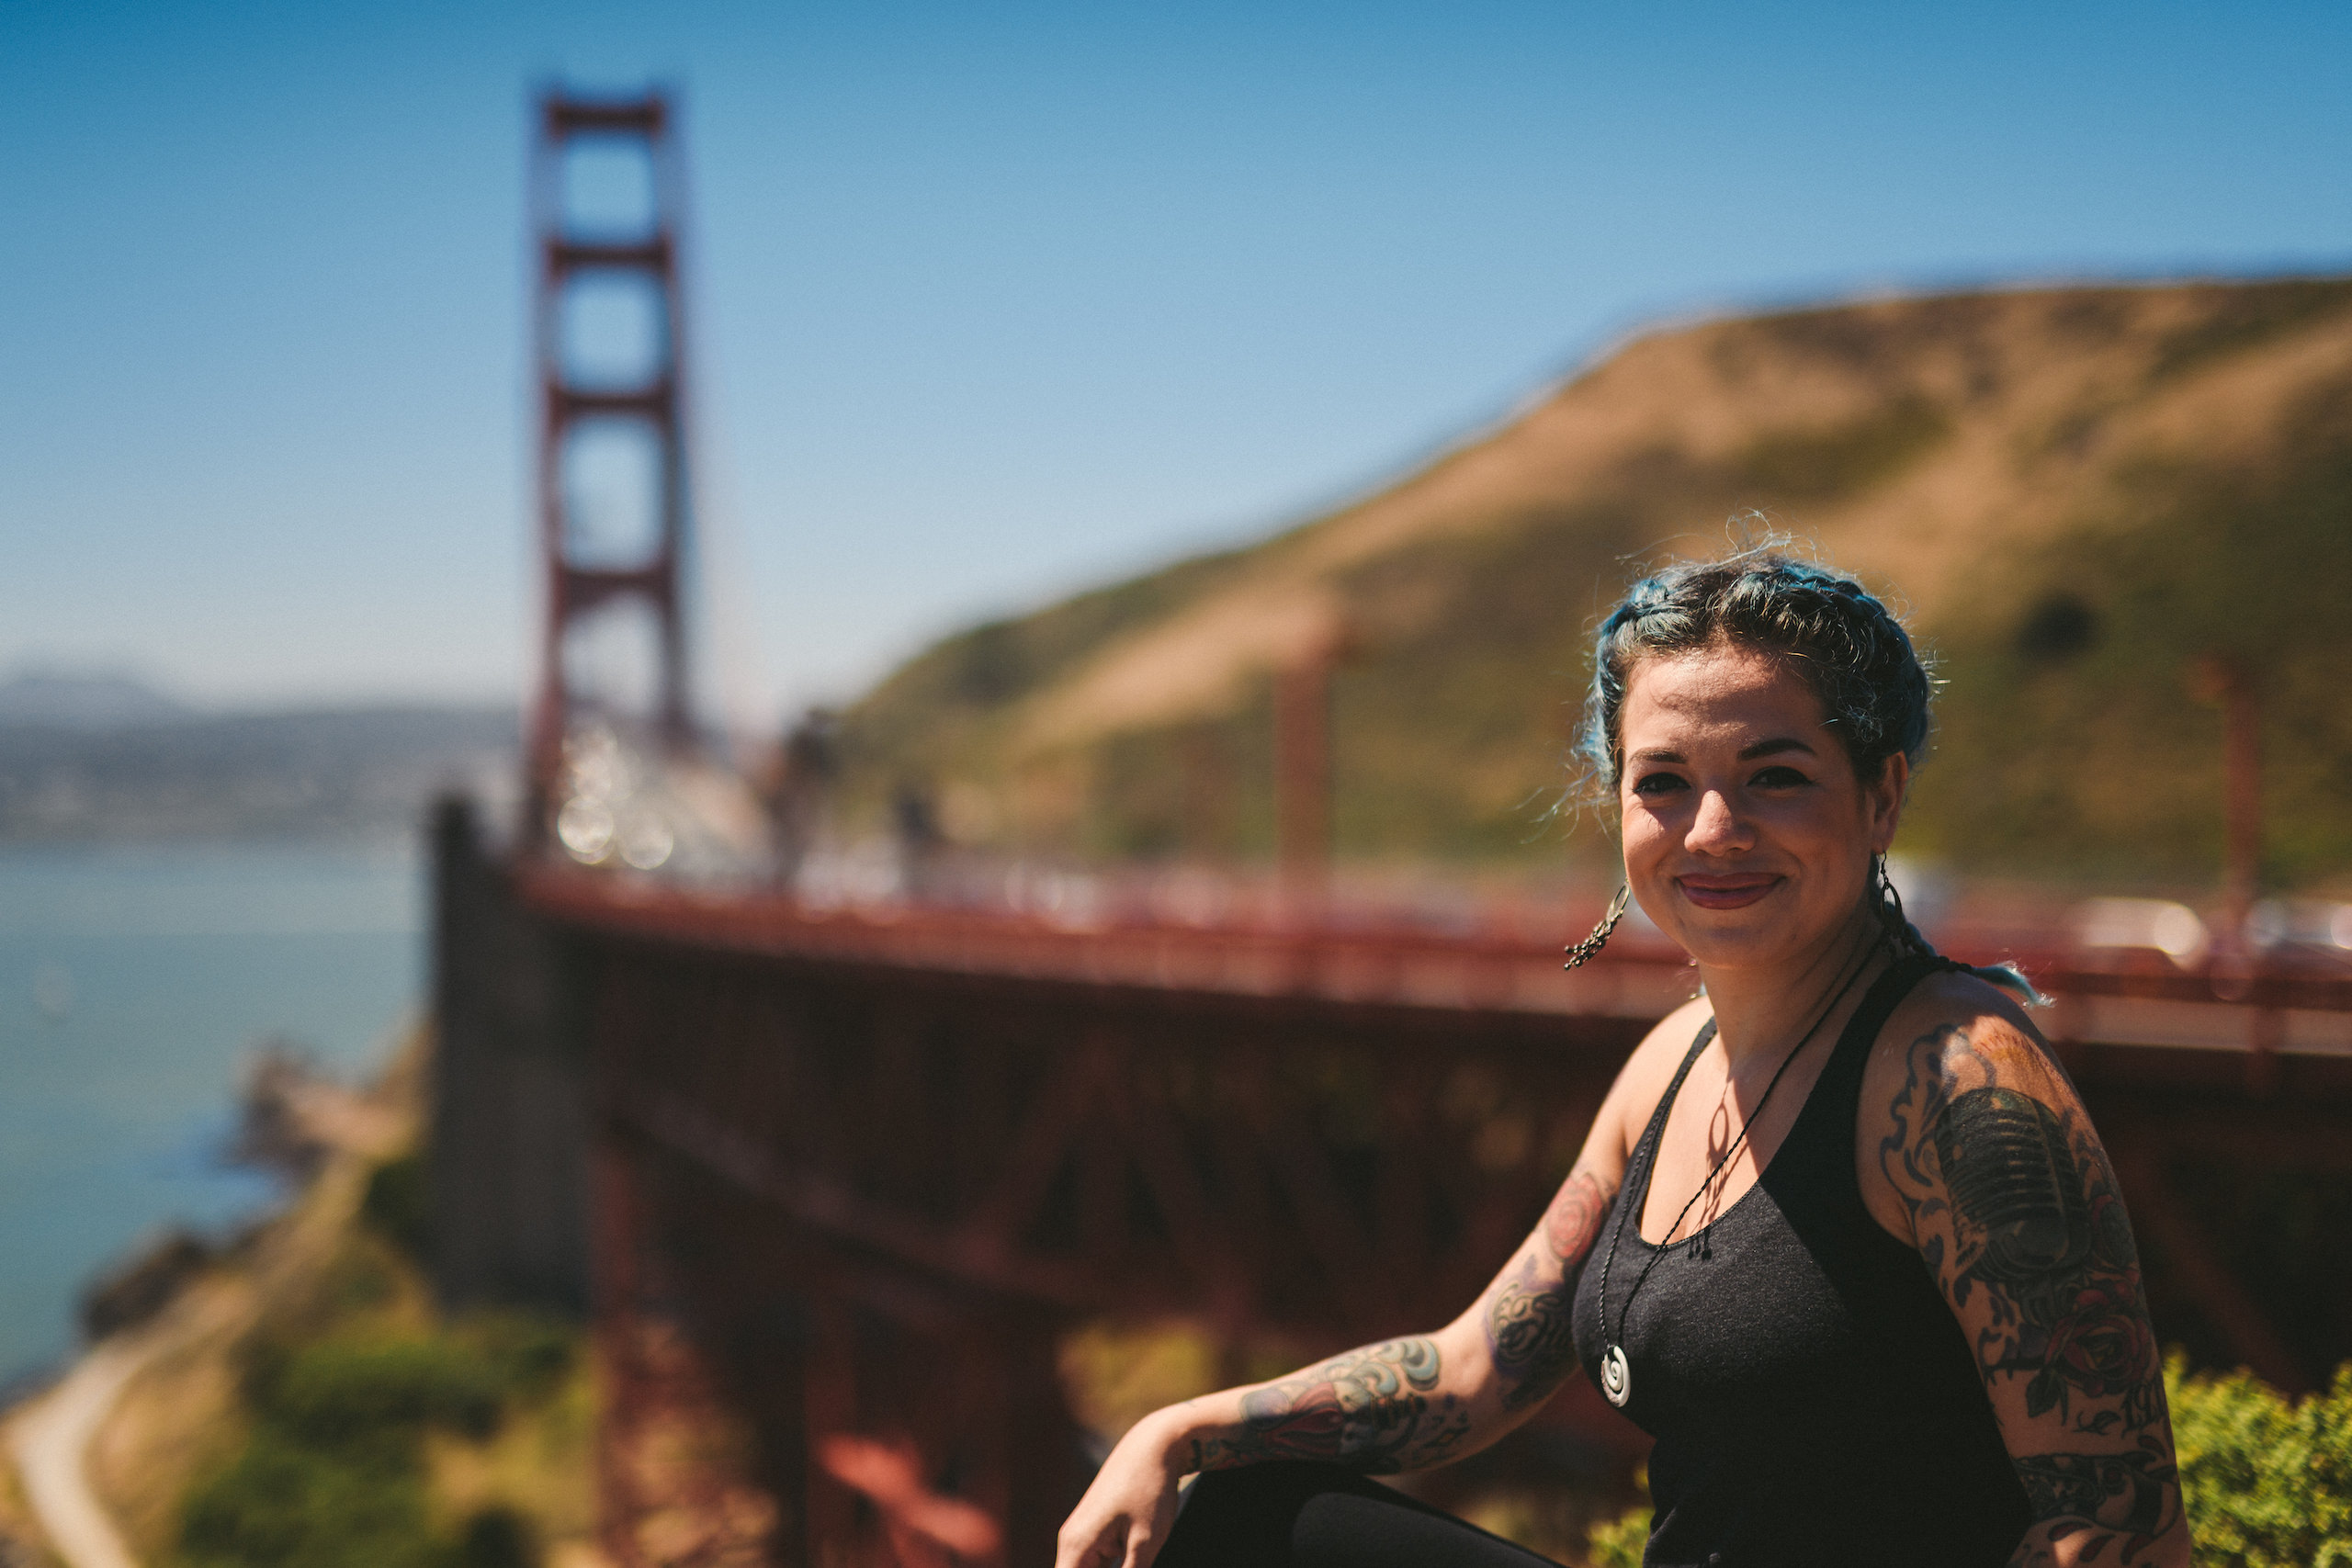 Tattooed woman with blue tint hair and wearing a black tank top smiling and posing by the San Francisco Bridge